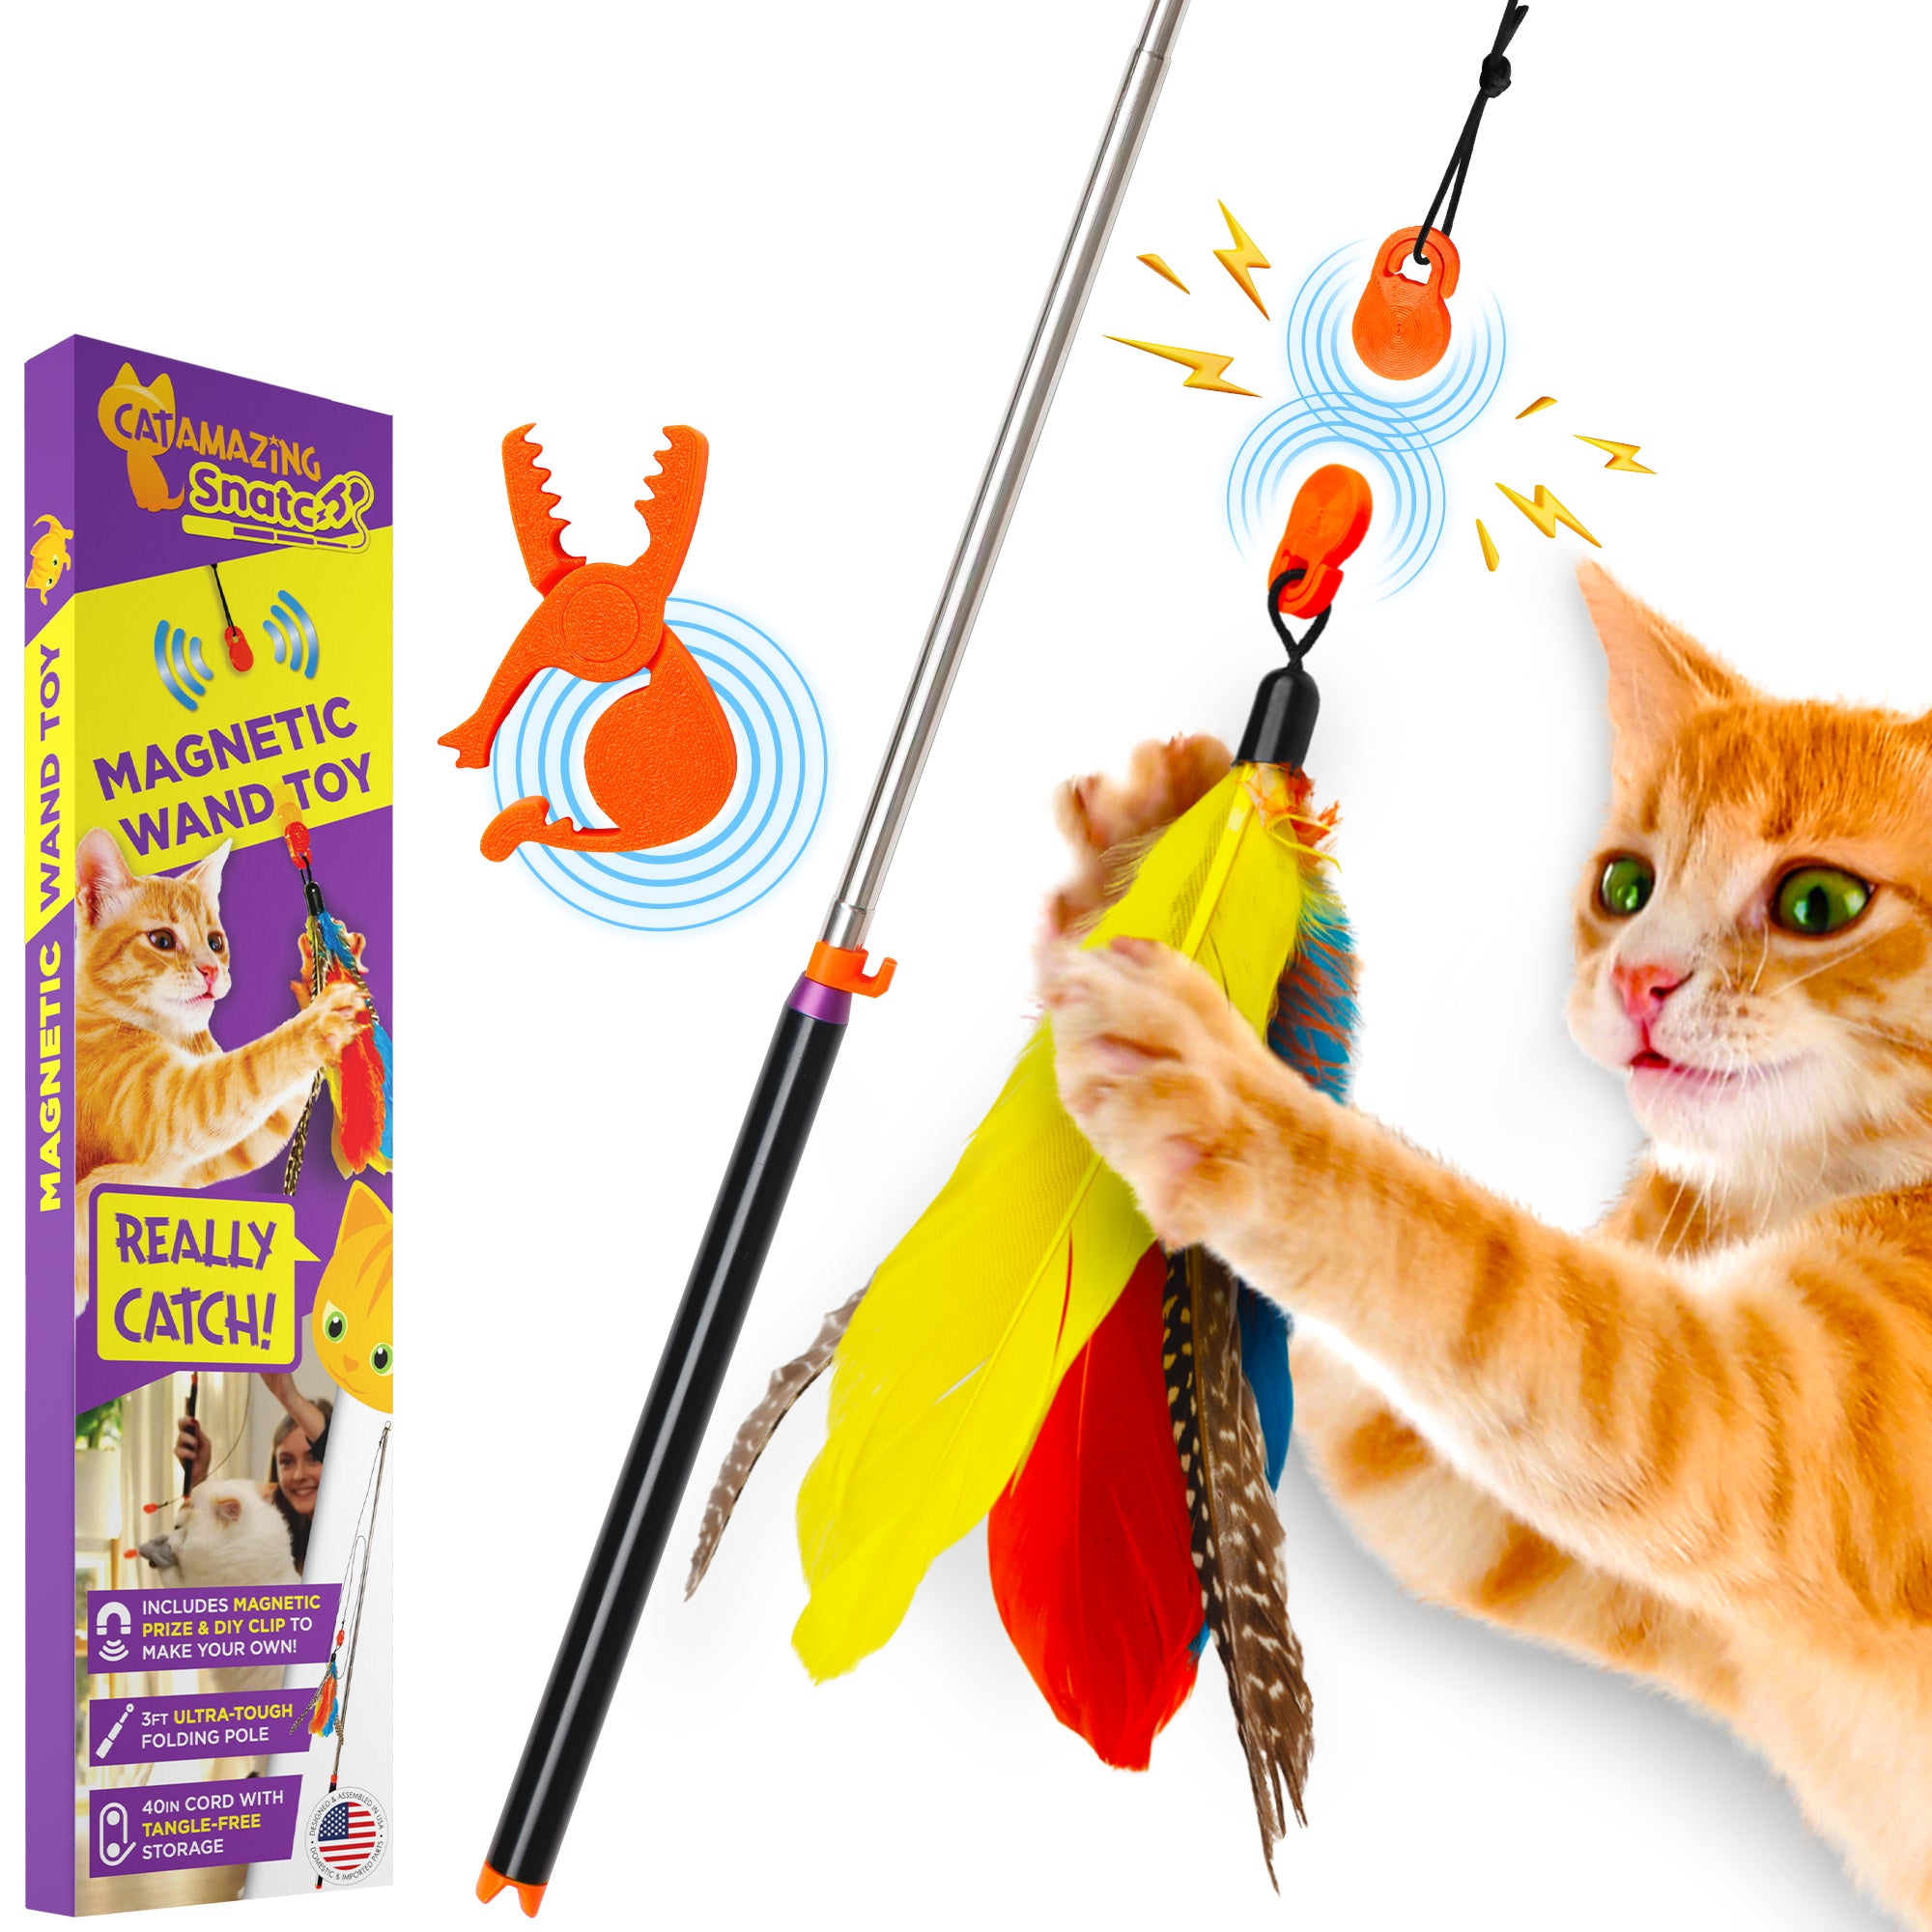 Cat Amazing snatch magnetic wand toy teaser